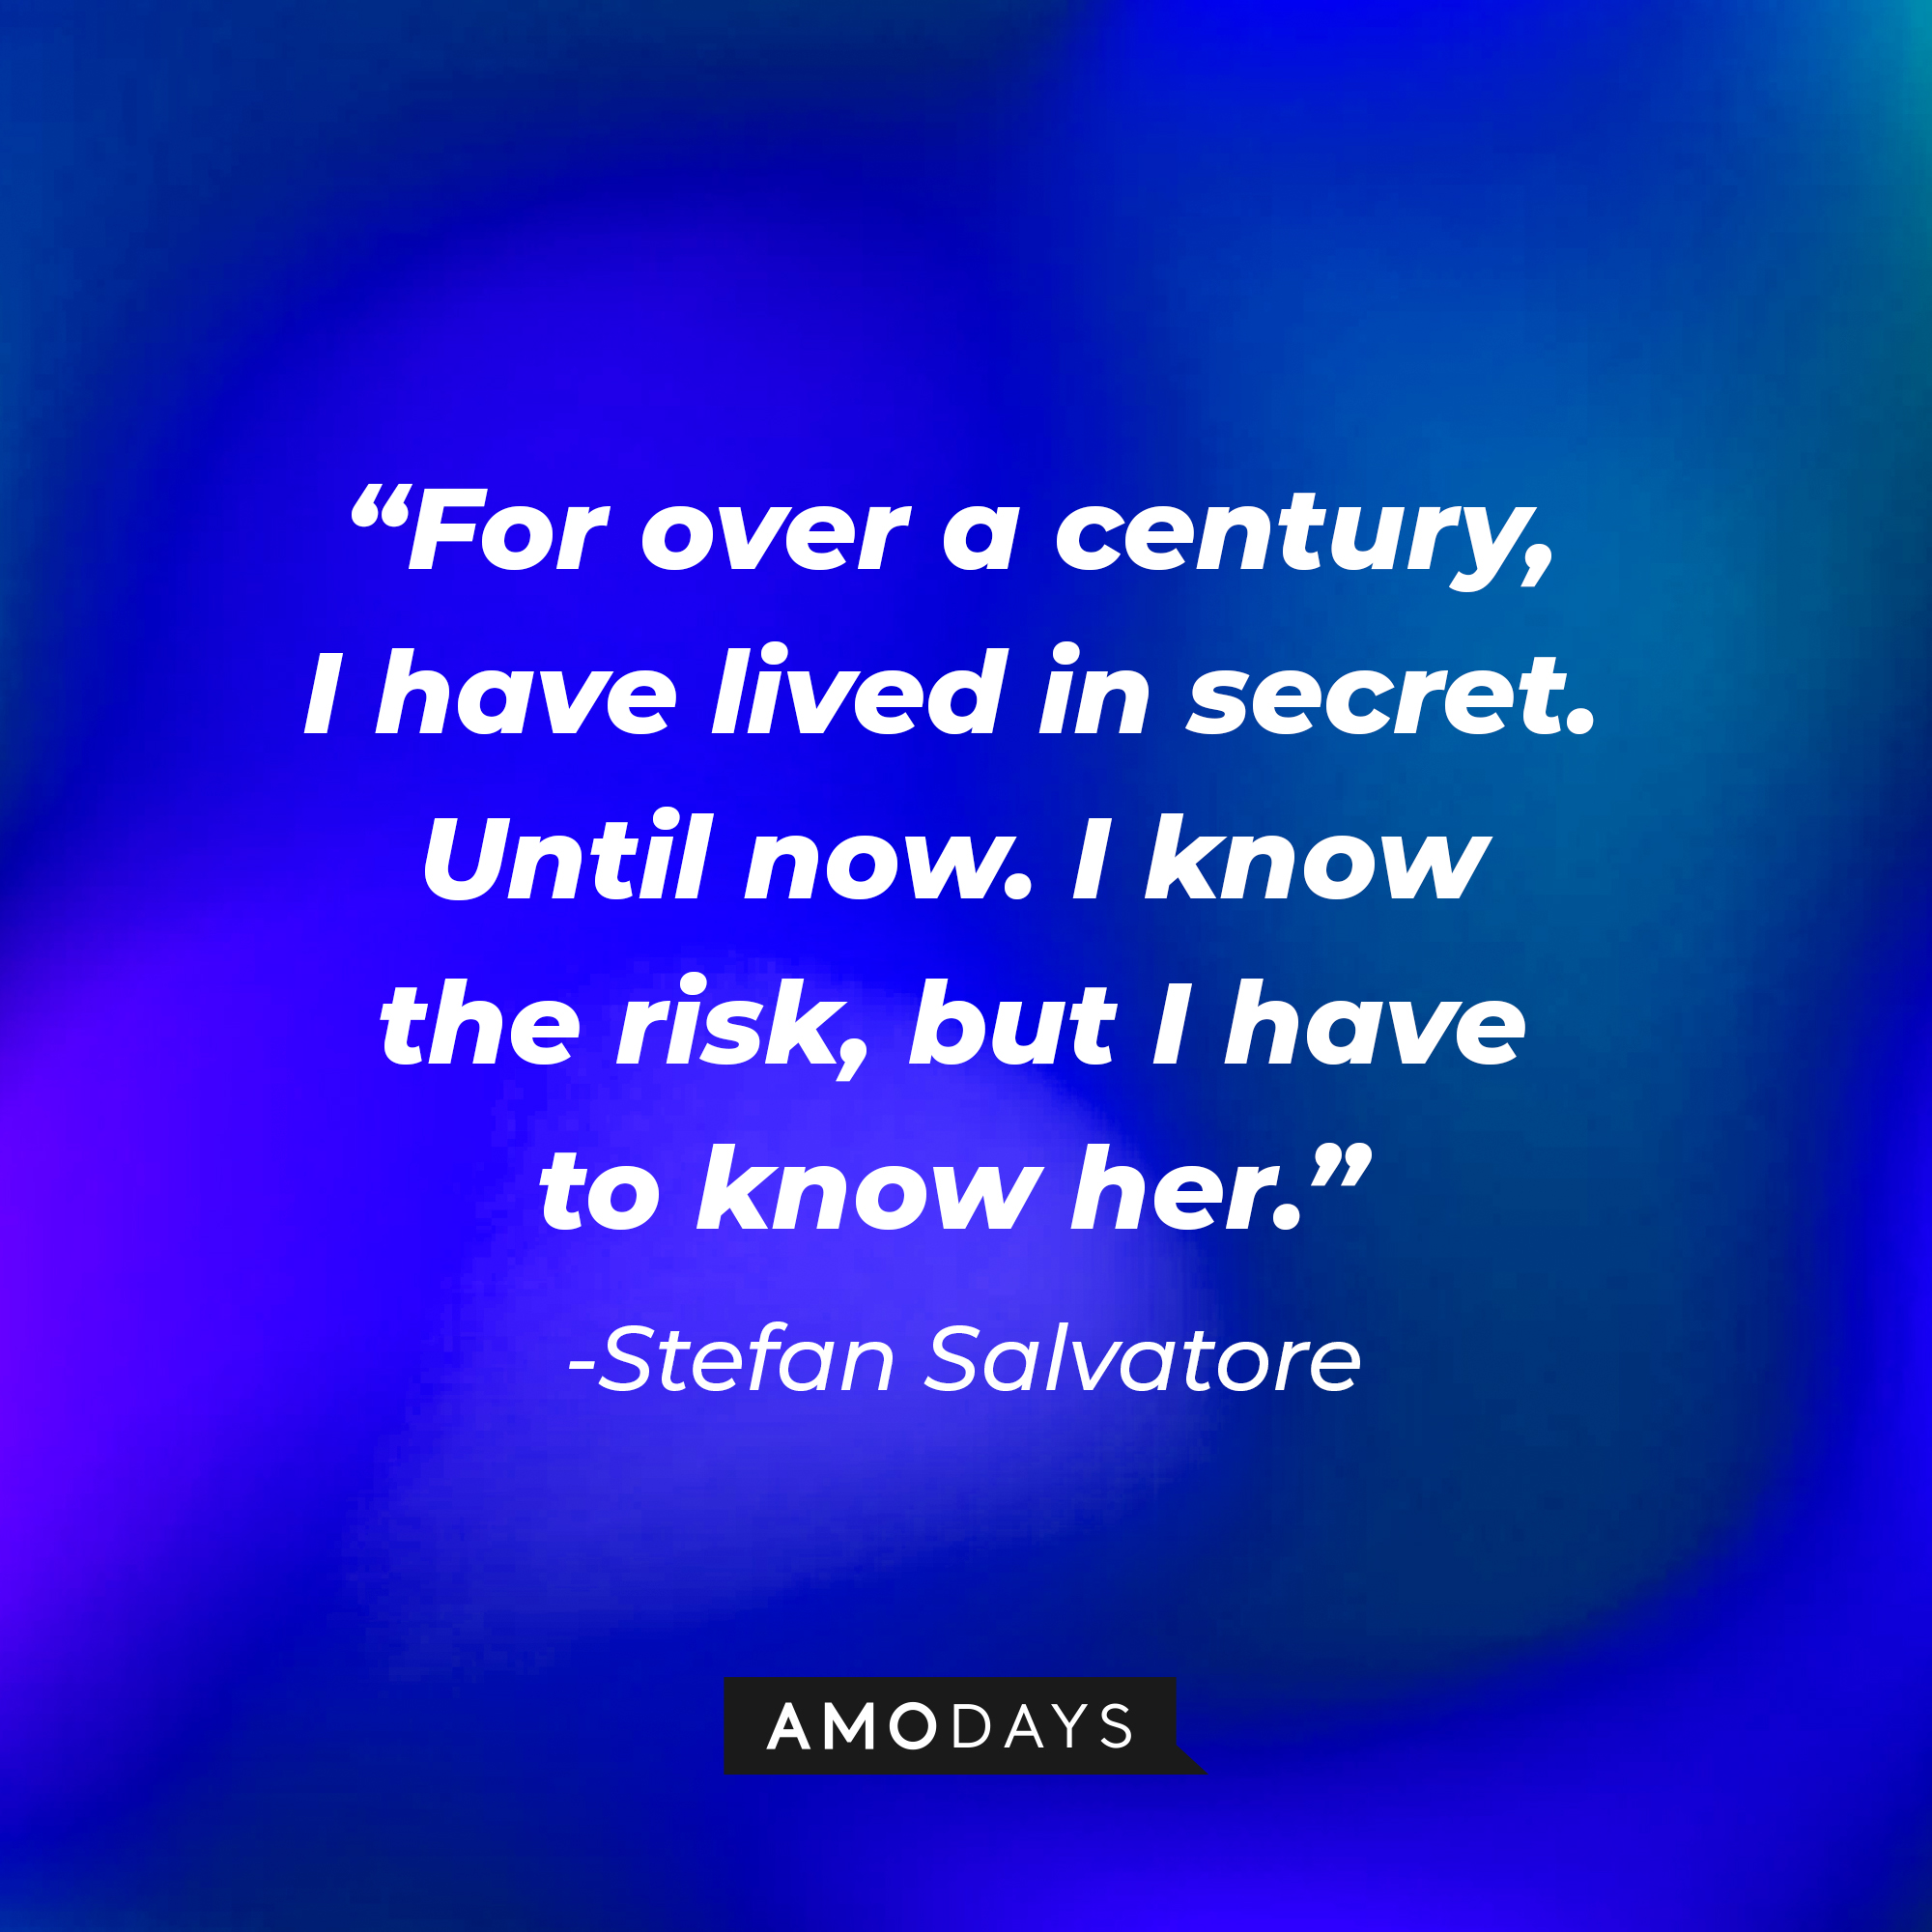 Stefan Salvatore's quote: "For over a century, I have lived in secret. Until now. I know the risk, but I have to know her." | Source: AmoDays